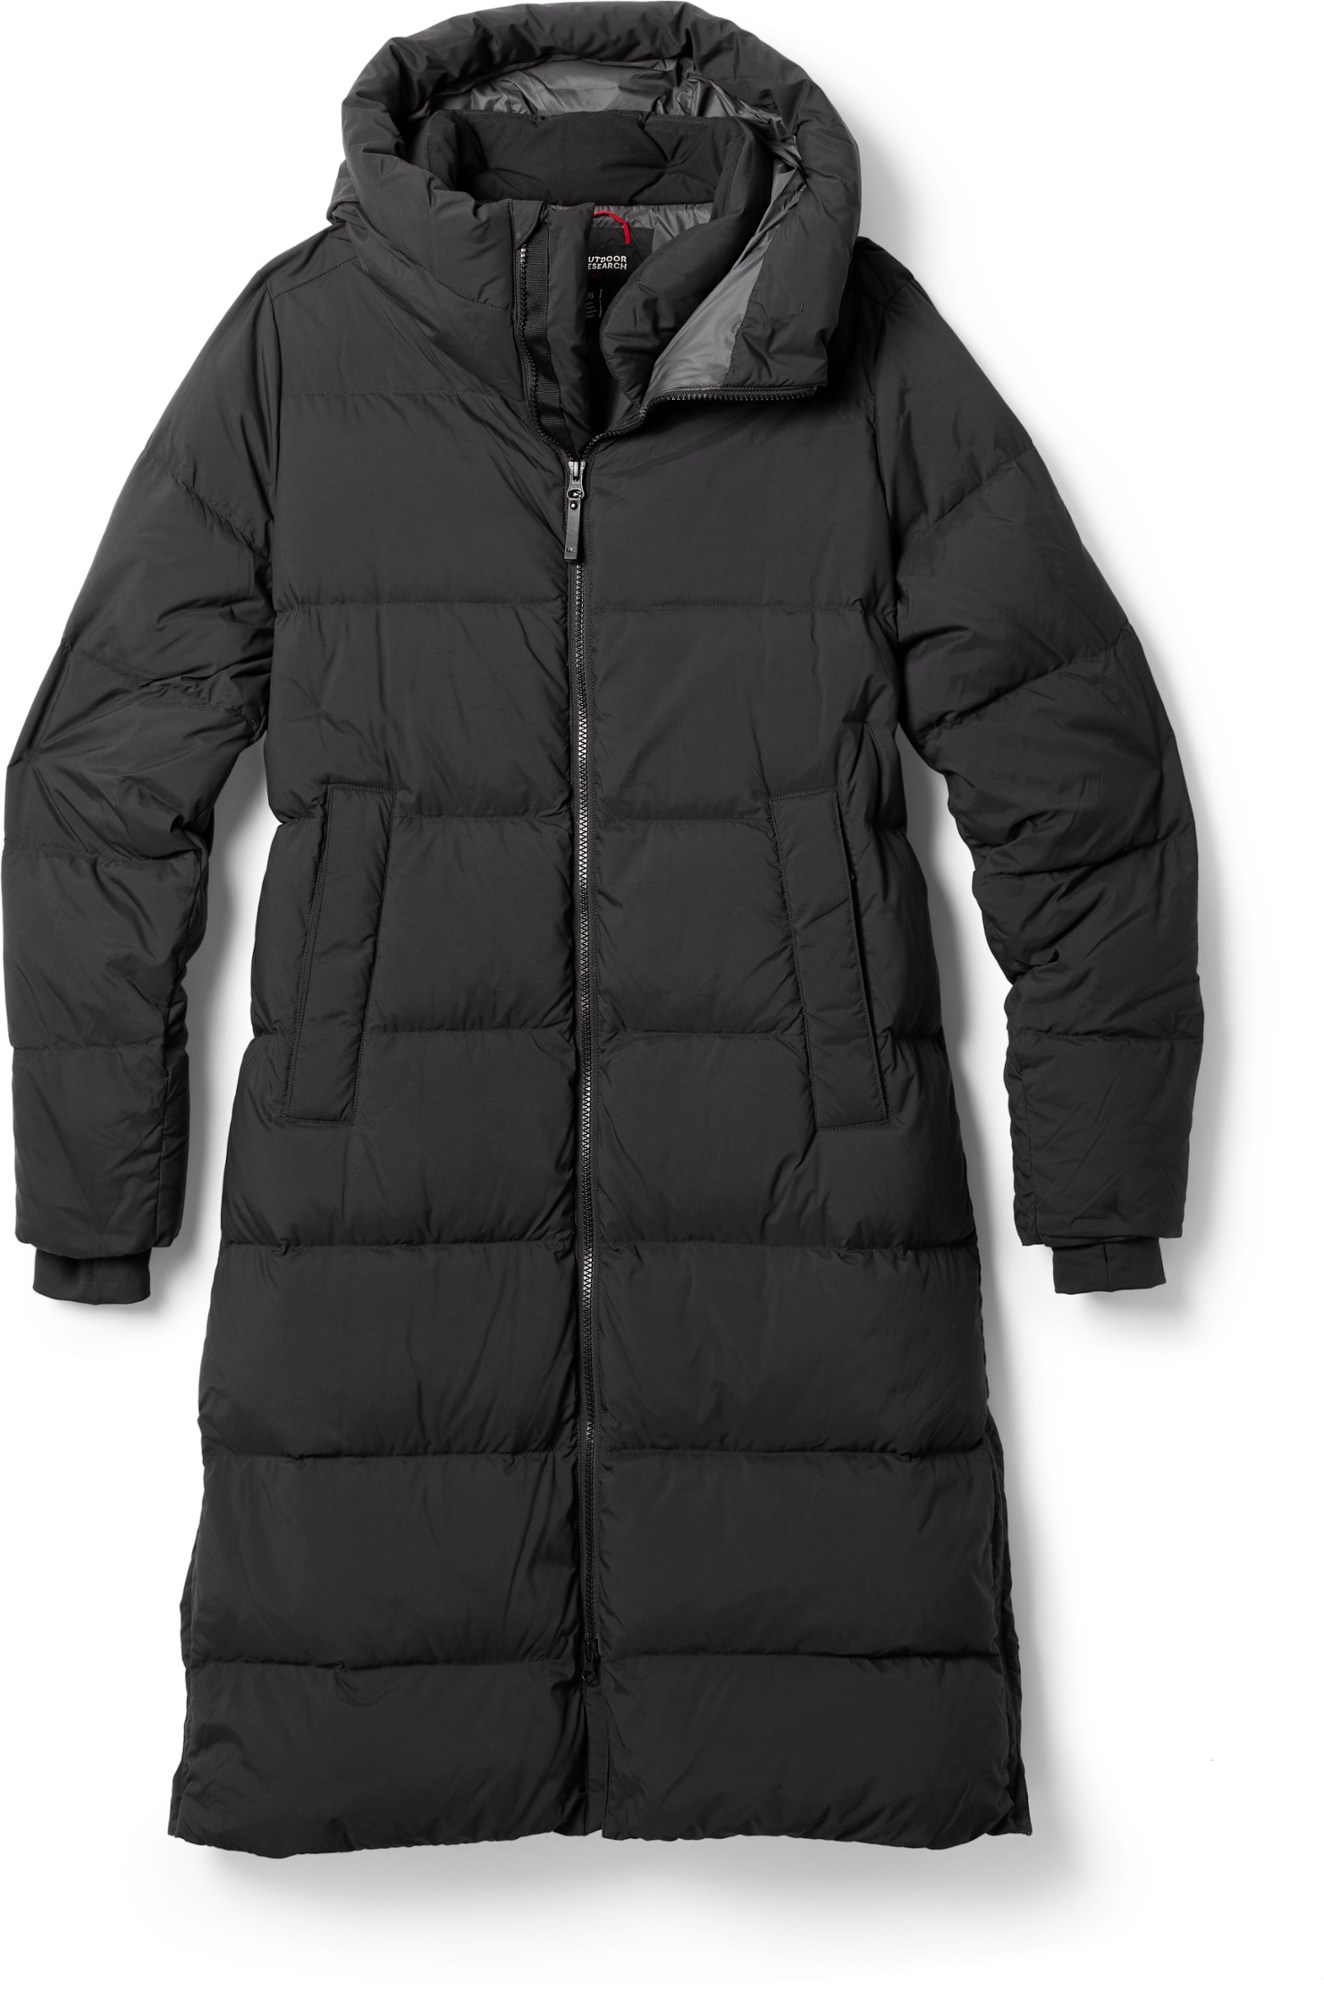 outerknown puffer jacket